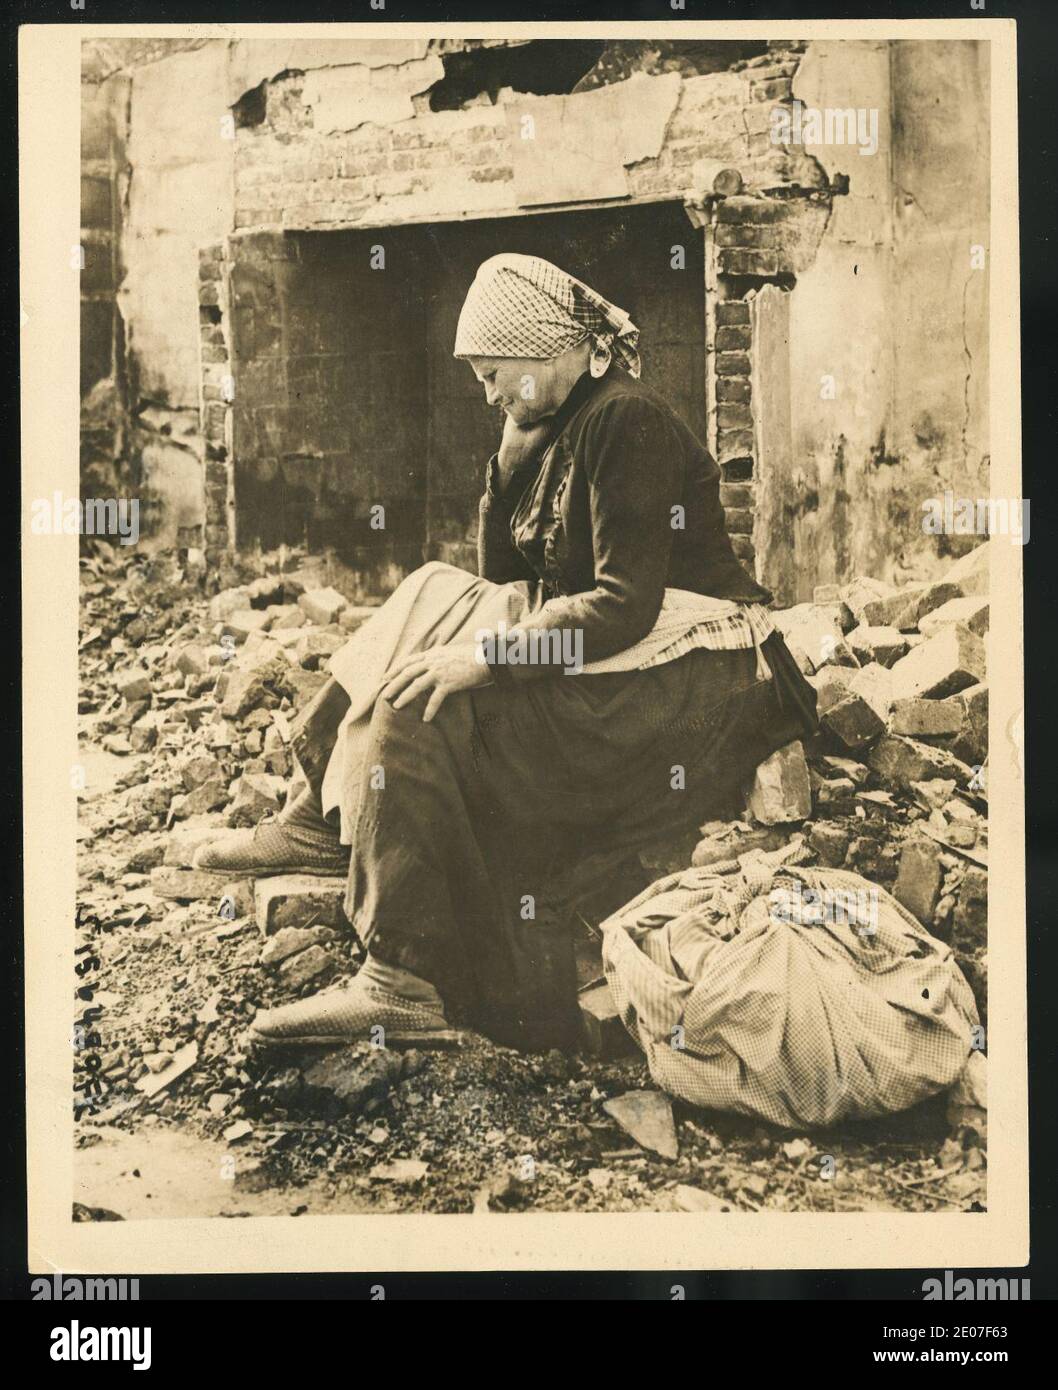 Learning of German retreat from her district, French woman returns to find her home a heap of ruins Stock Photo